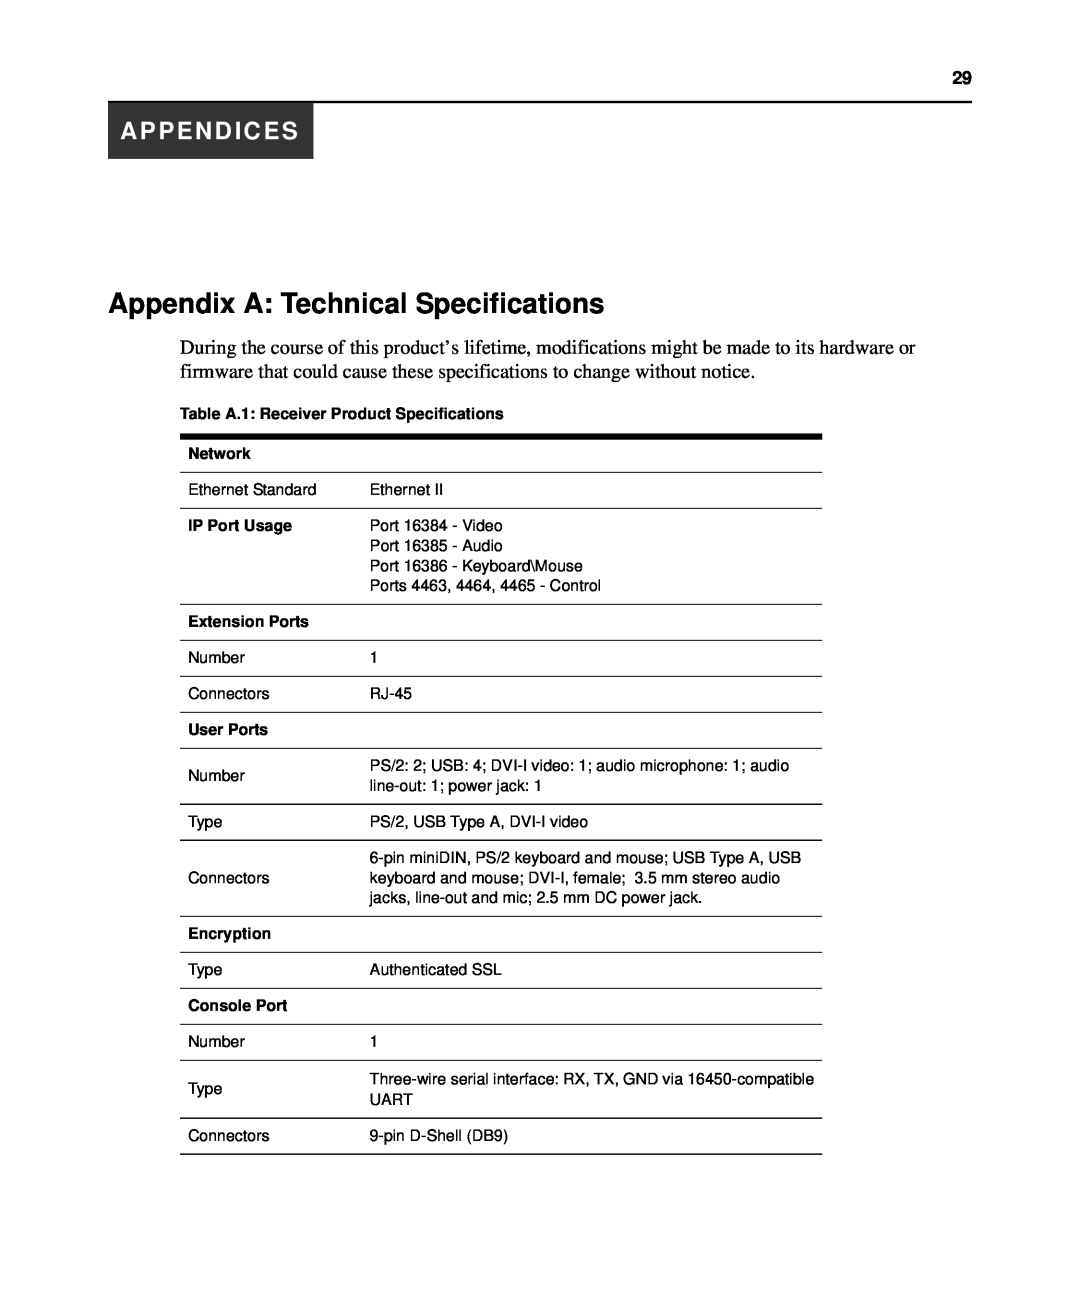 Avocent LongView IP Appendix A Technical Specifications, Appendices, Table A.1 Receiver Product Specifications Network 